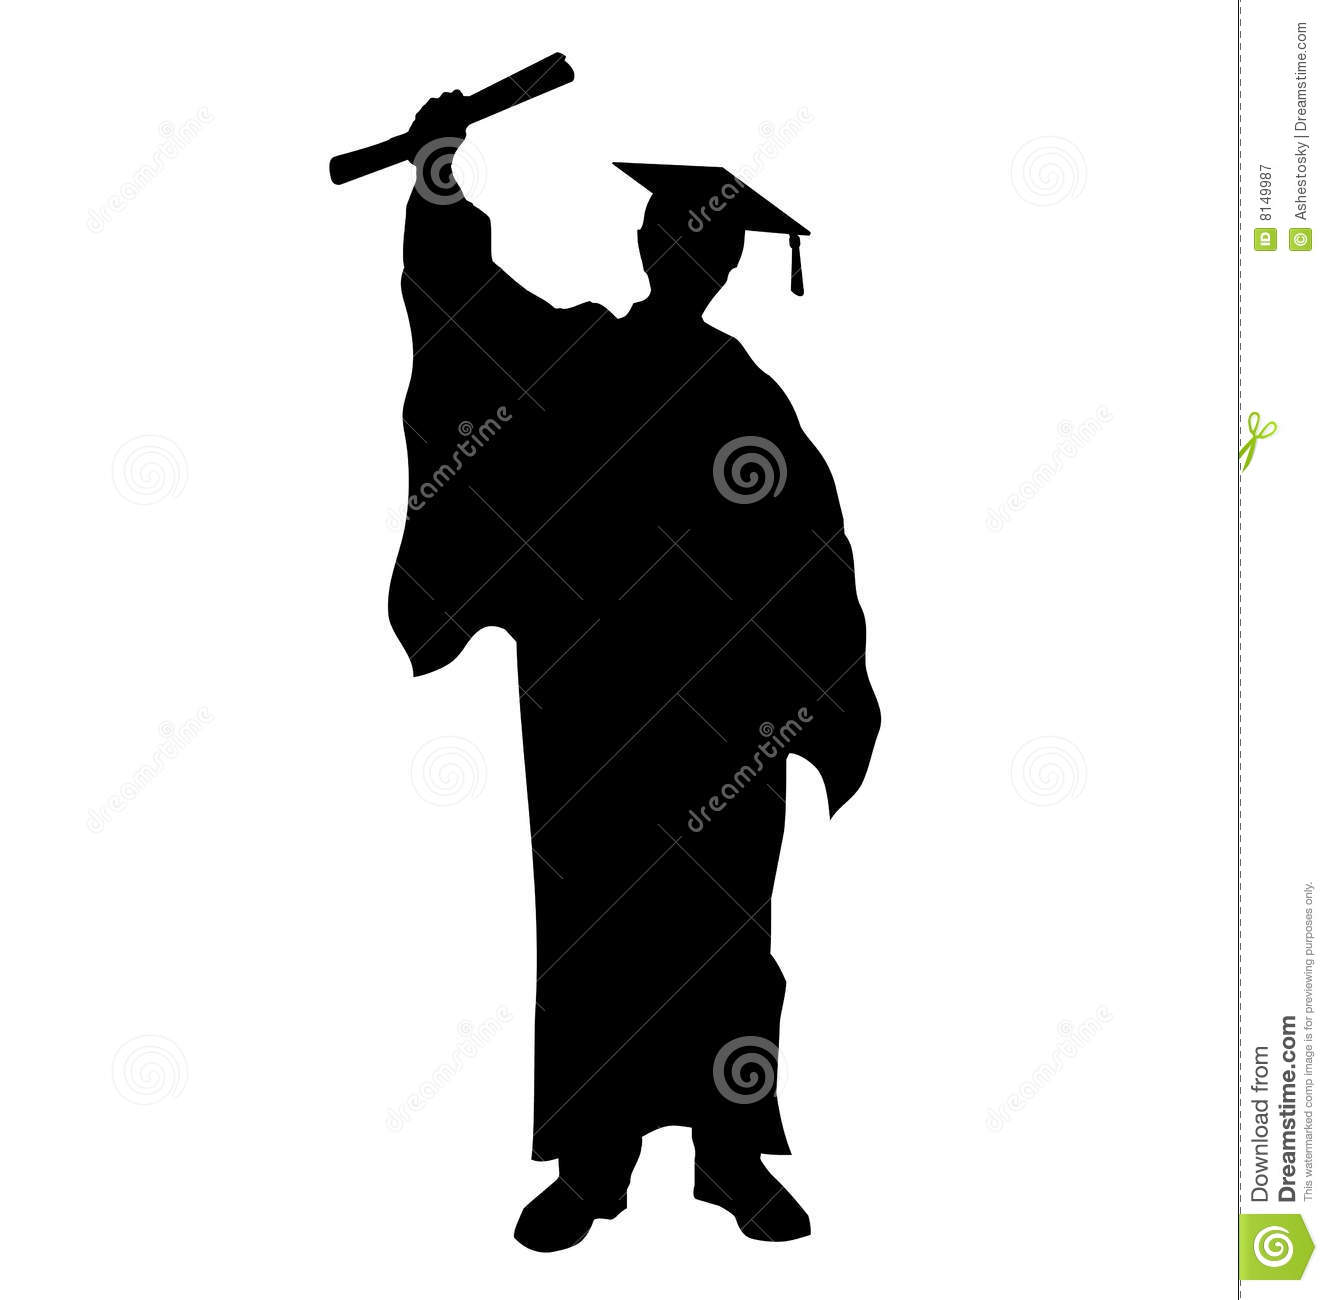 Graduate Student Silhouette Royalty Free Stock Photography   Image